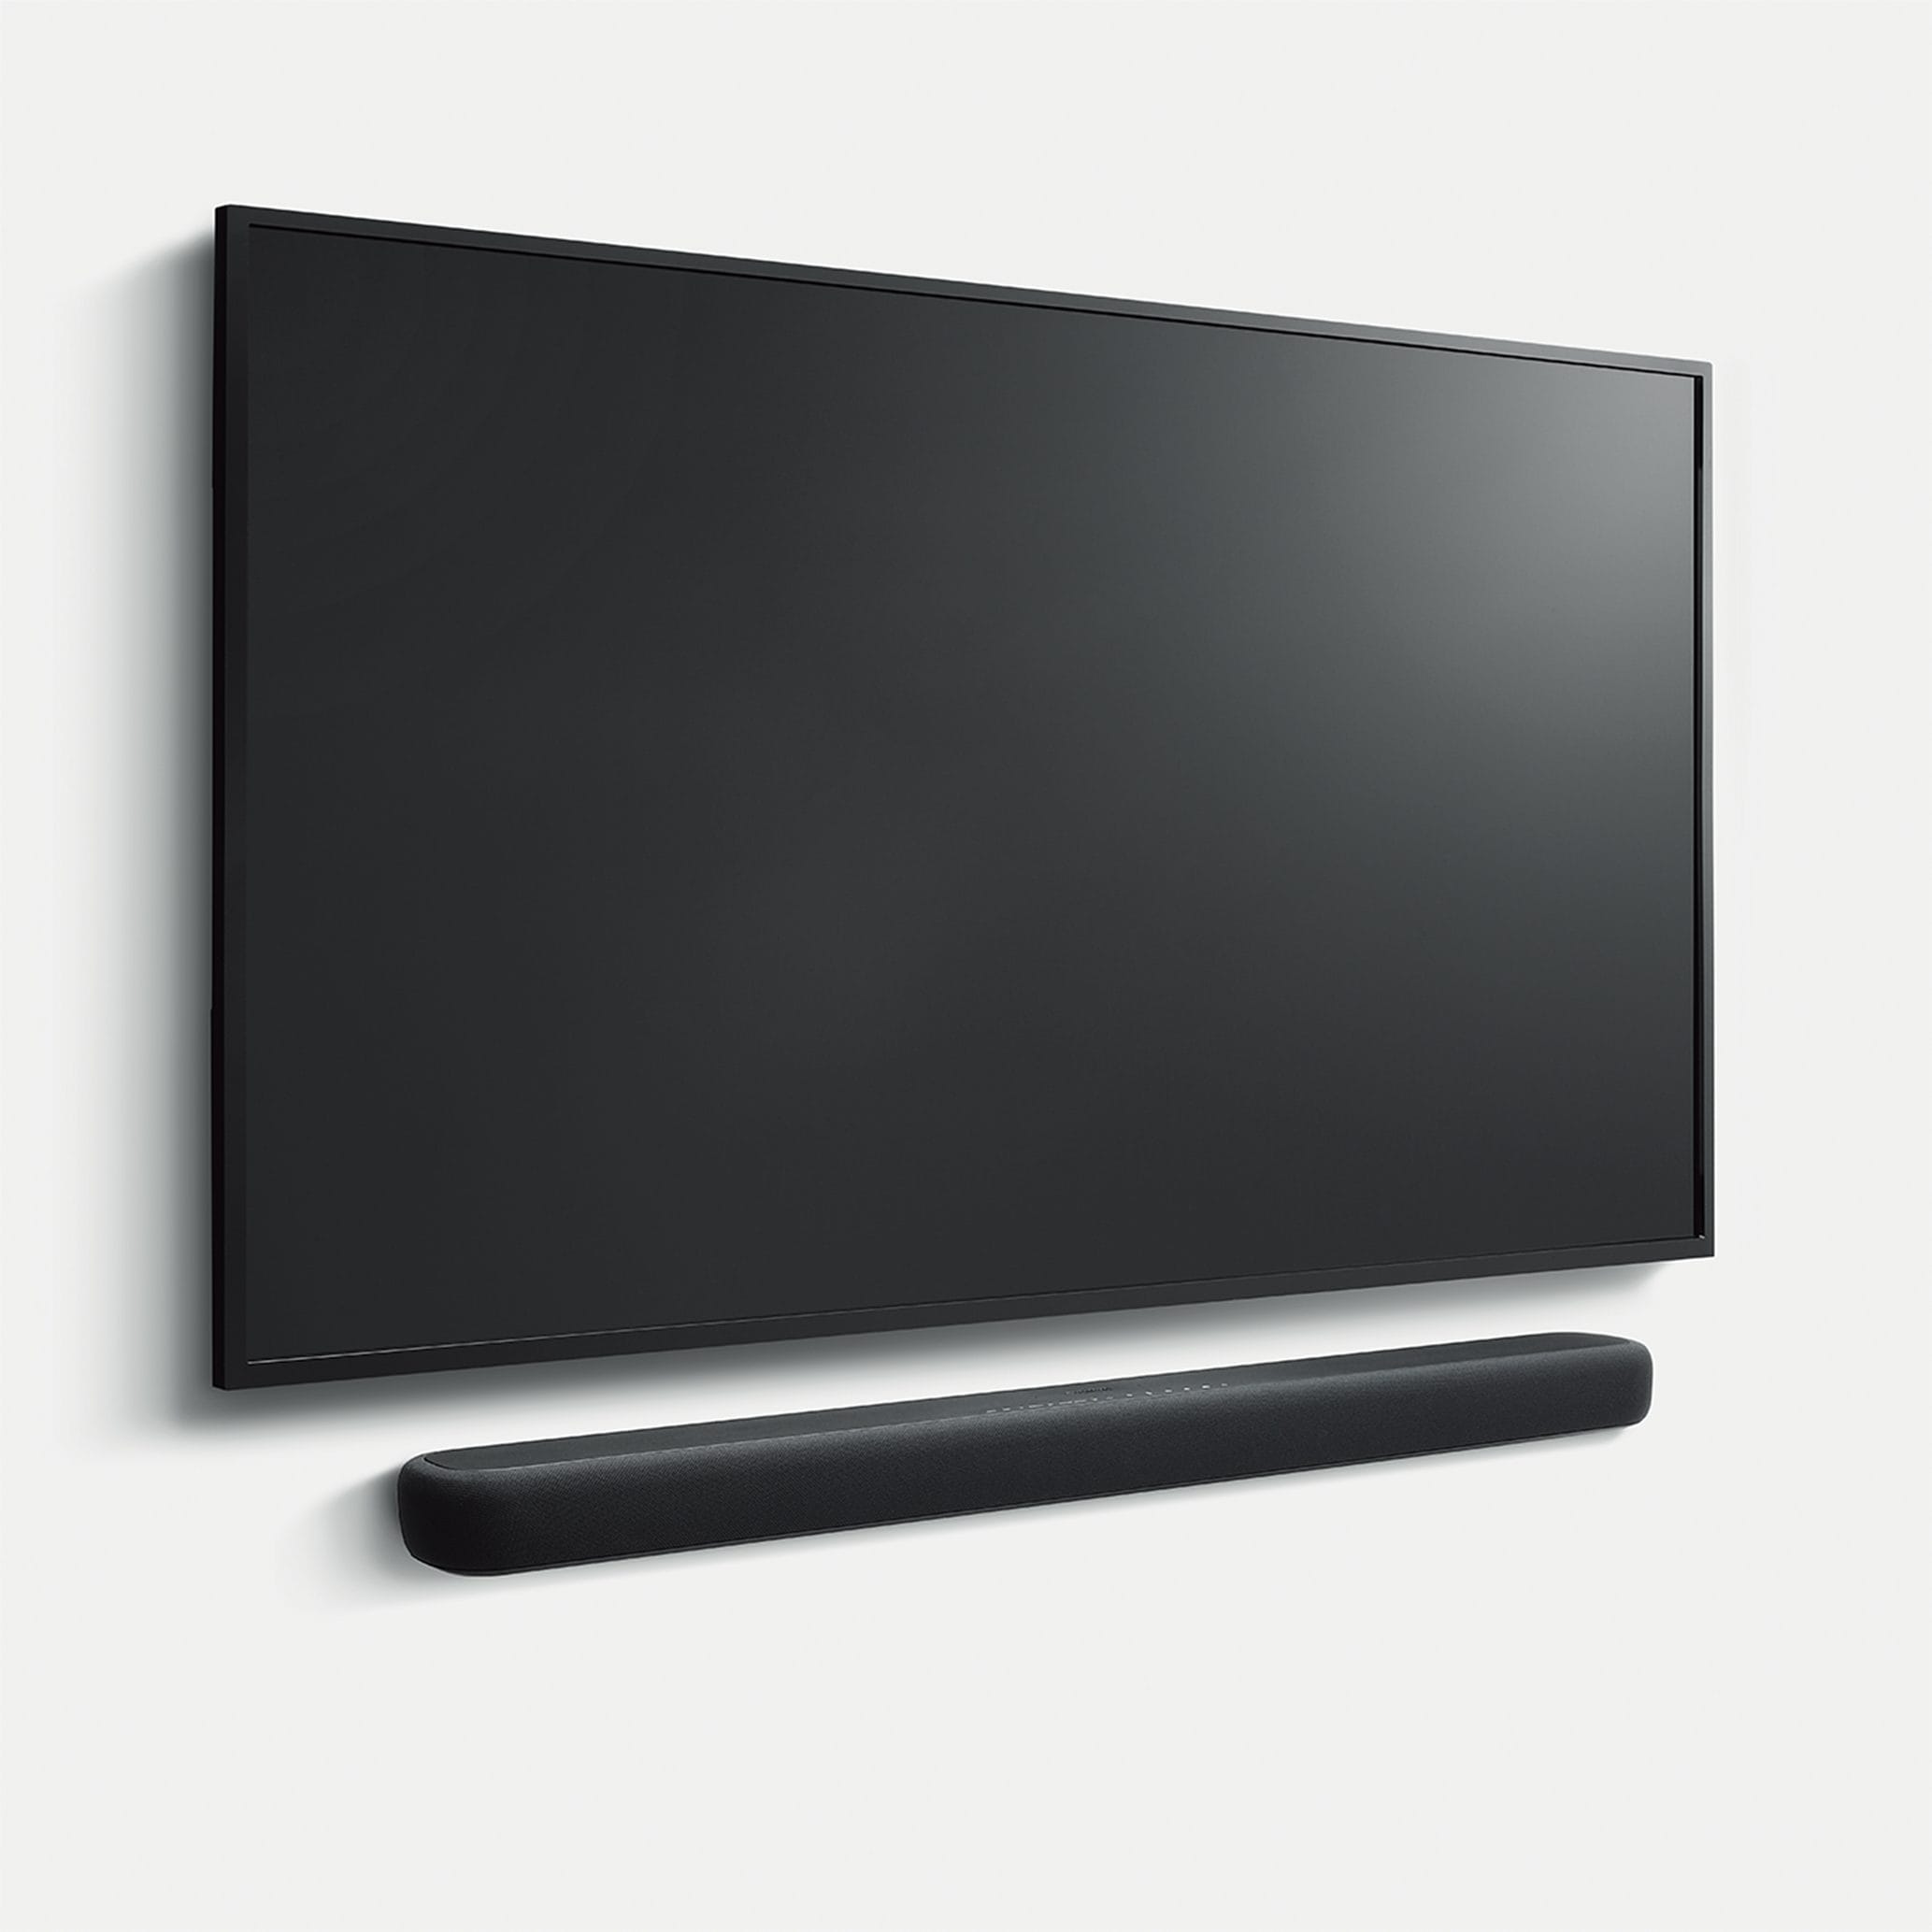 Renewed and Alexa Voice Control Built-in Yamaha ATS-2090 Sound Bar with Wireless Subwoofer Bluetooth